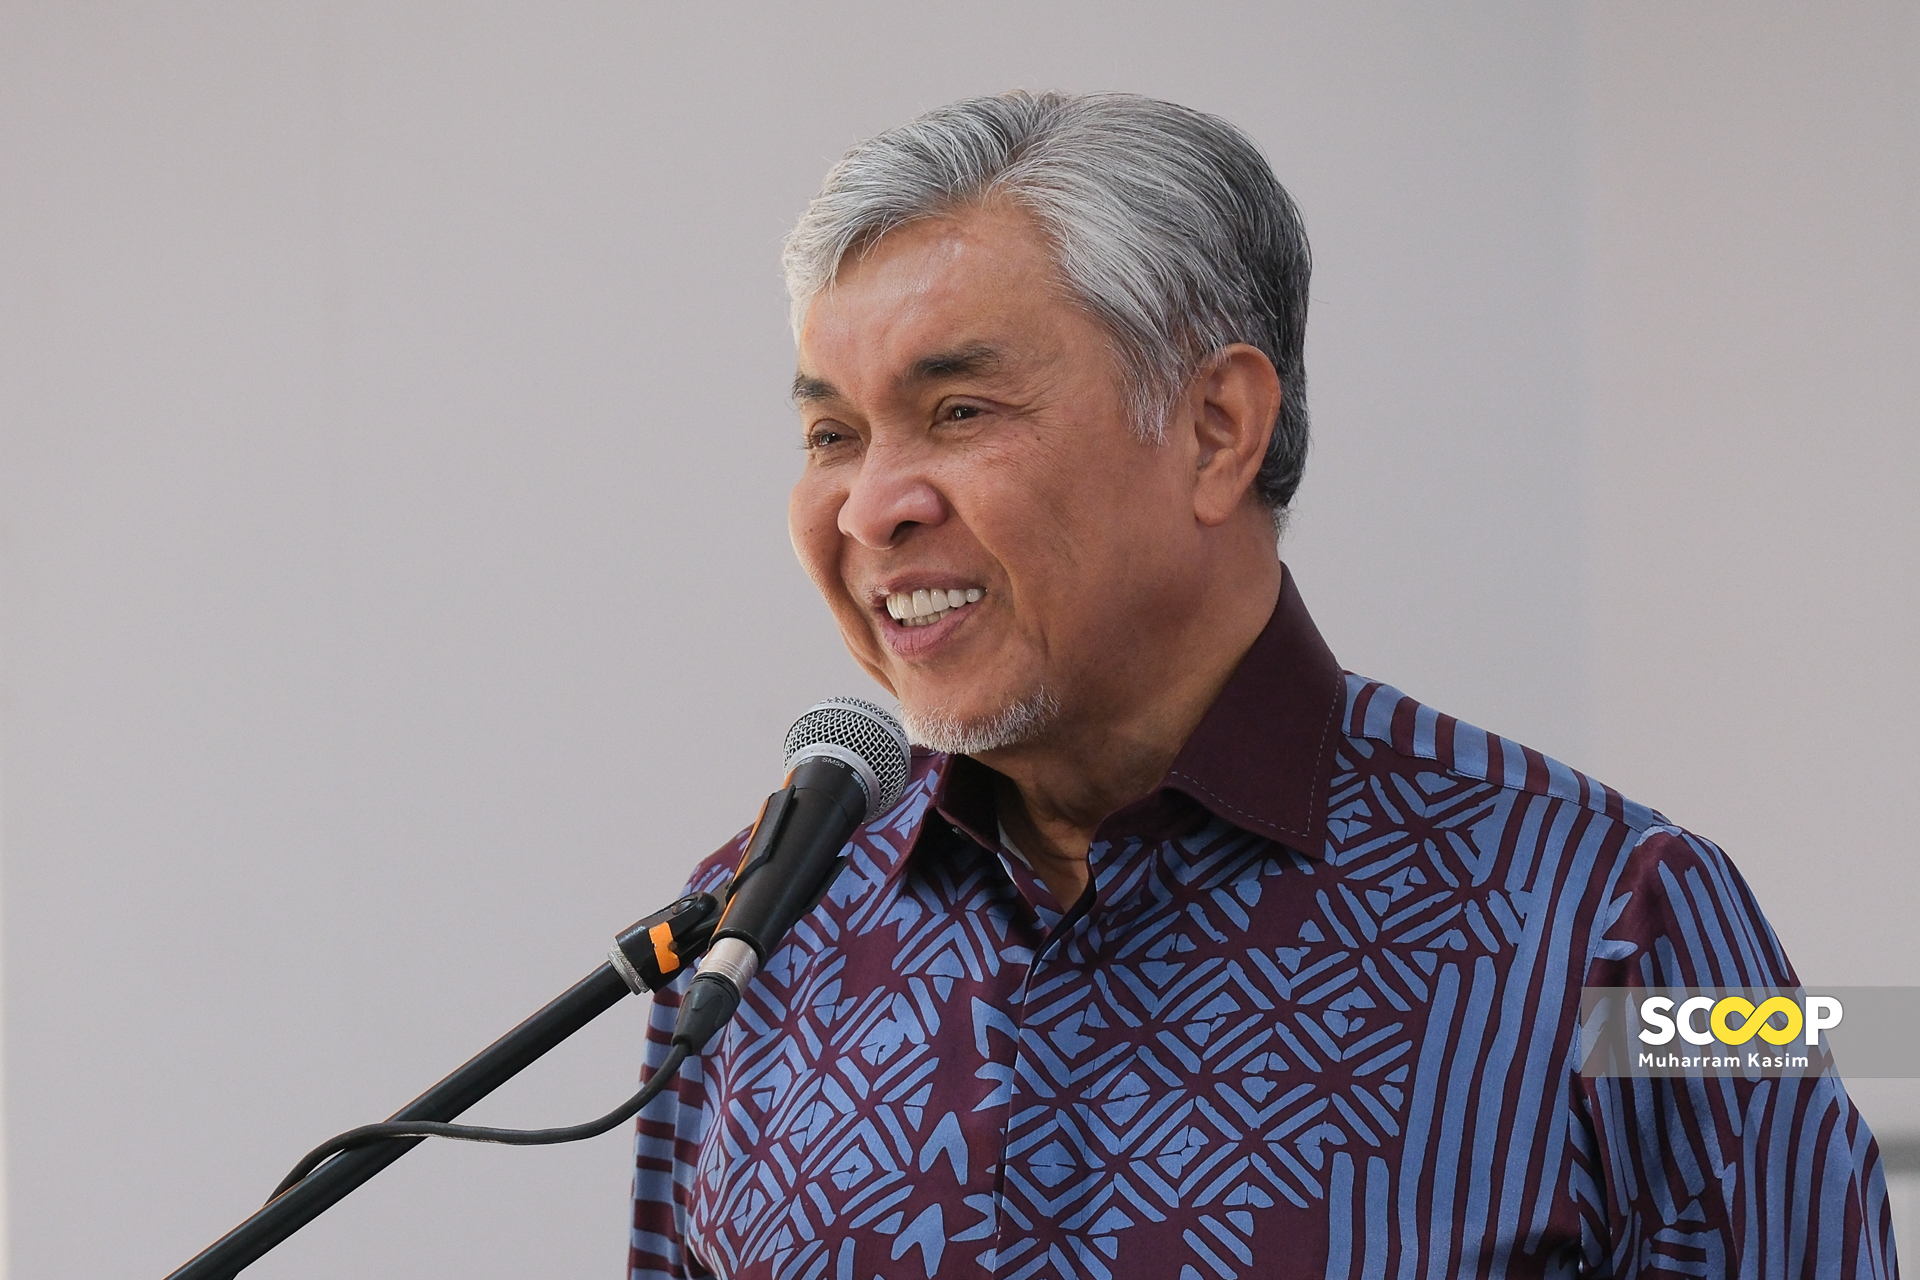 Esports to get recognition at cabinet level: Zahid